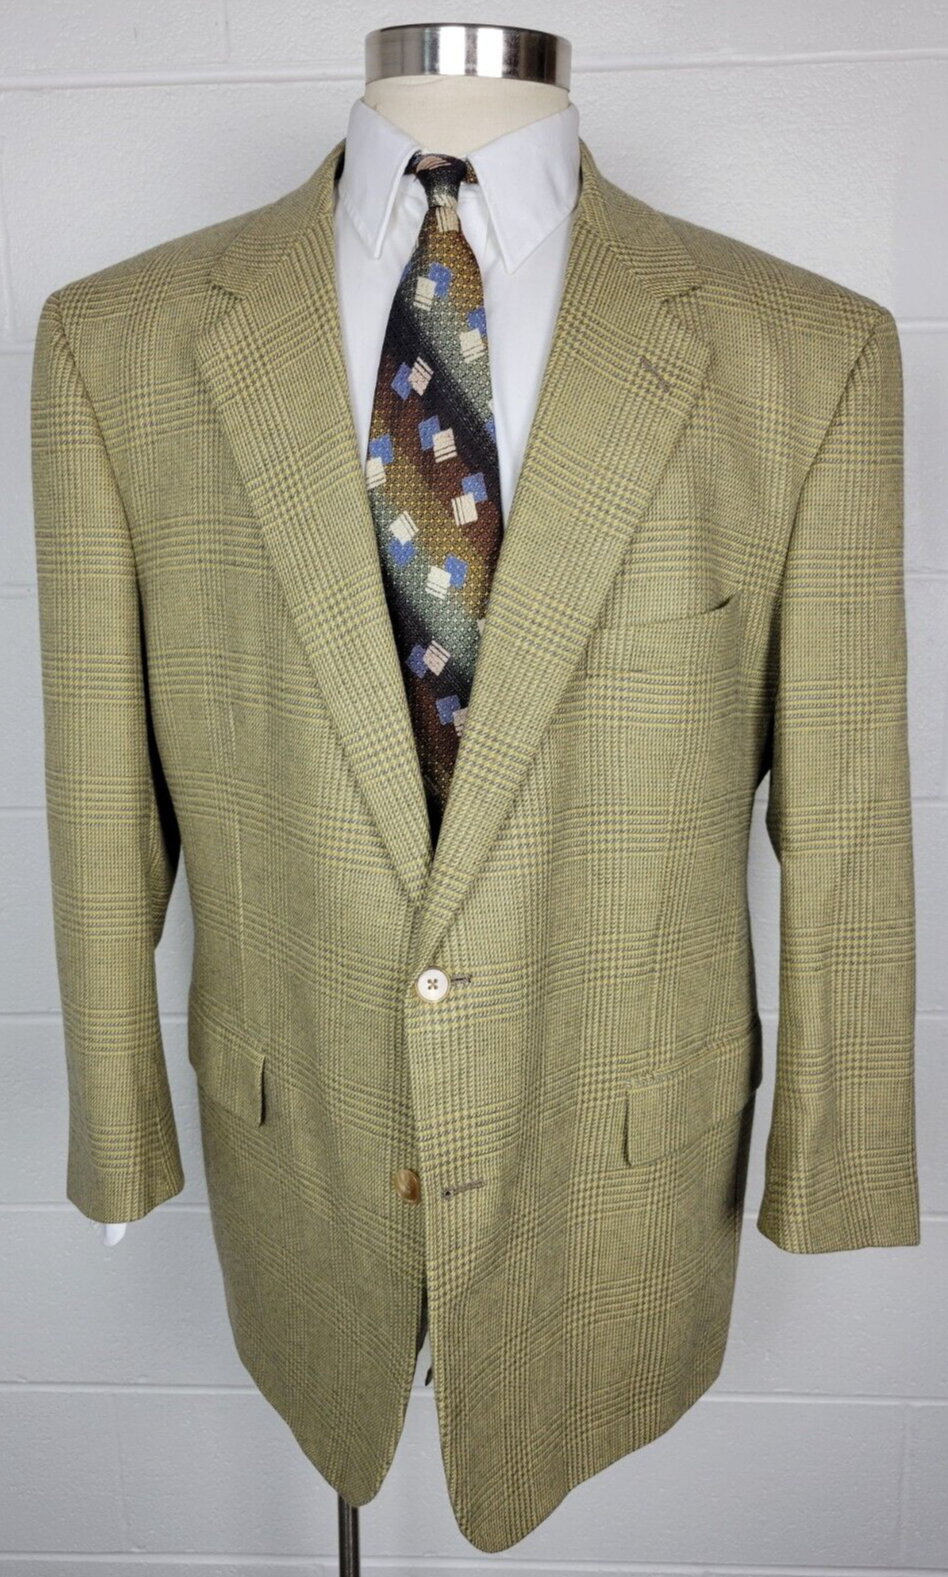 Primary image for Brooks Brothers Tan Gray Glen Plaid Wool Sport Coat Jacket Surgeons Cuffs 46L?